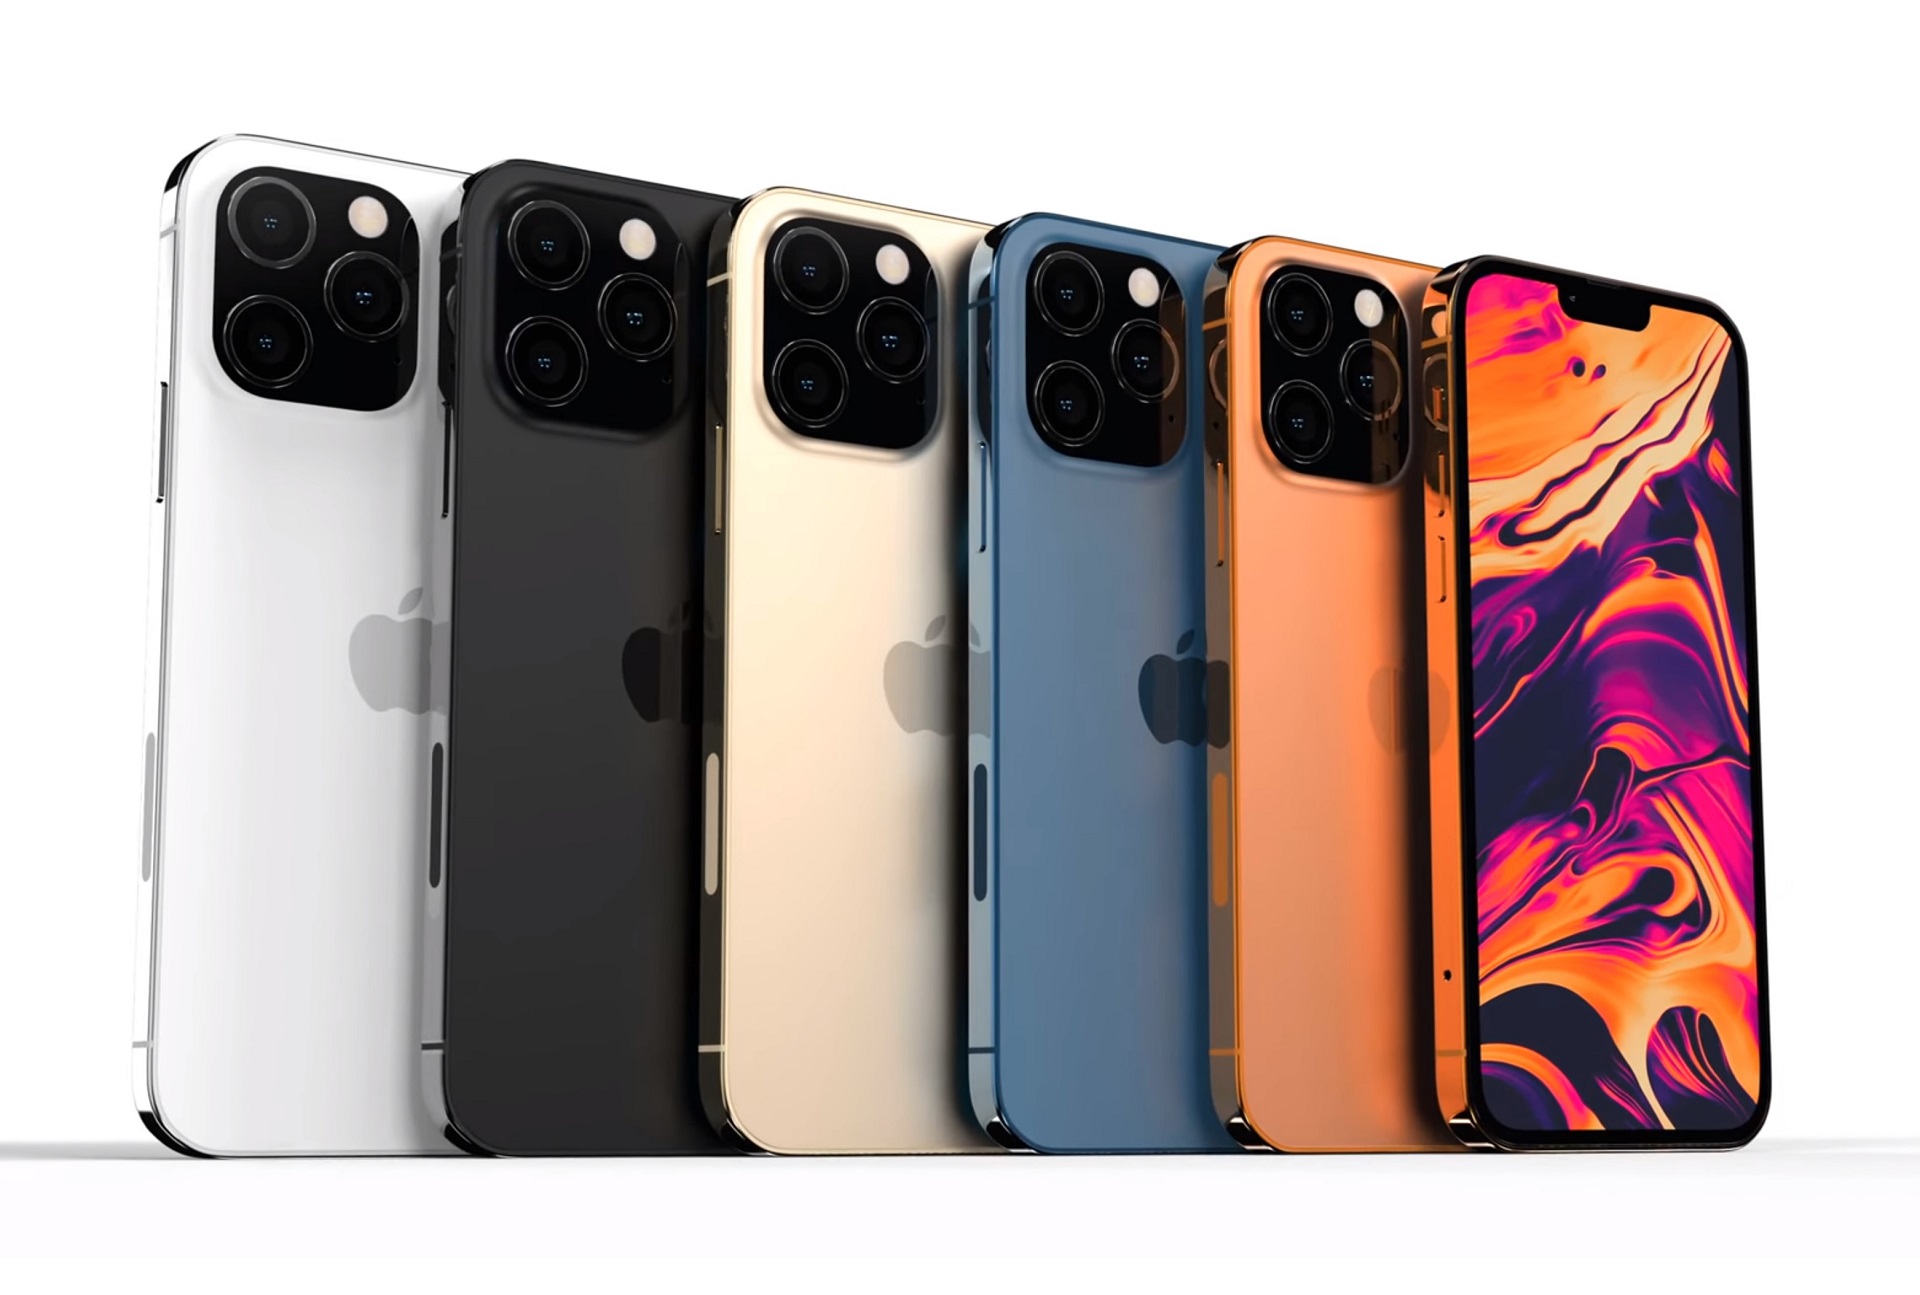 Leaks in the Apple iPhone 13 series reveal 120 Hz LTPO displays, multiple camera enhancements and new color and storage options;  AirTags will be launched for $ 39